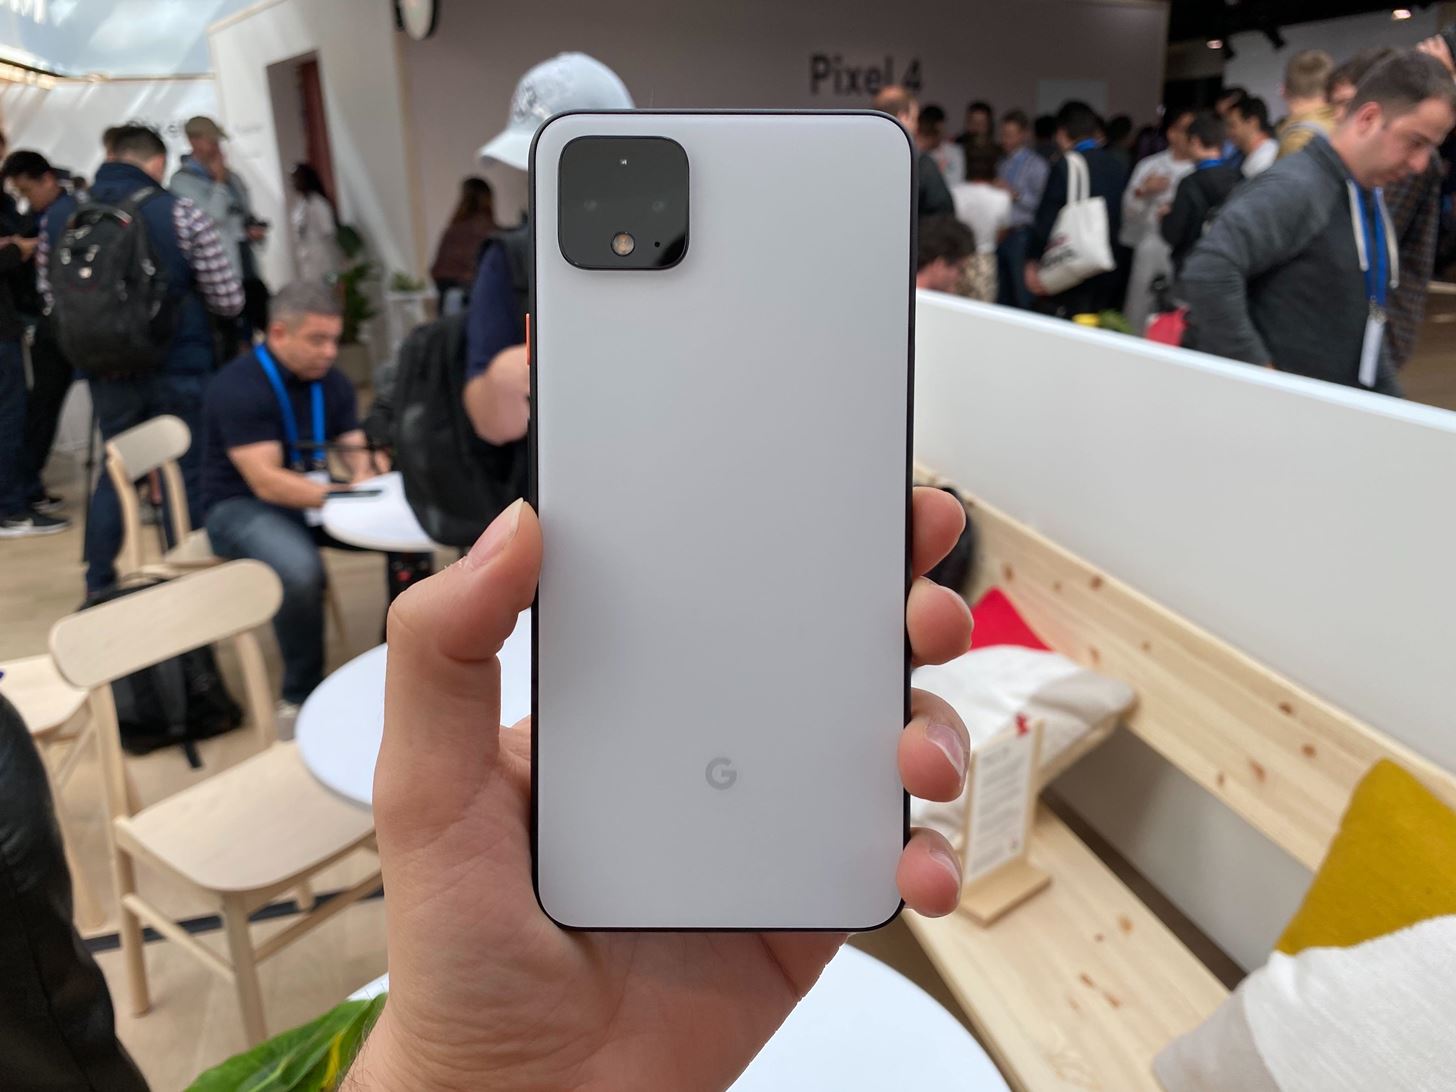 Google Pixel 4 vs. iPhone 11 Pro — All the Key Specs Compared